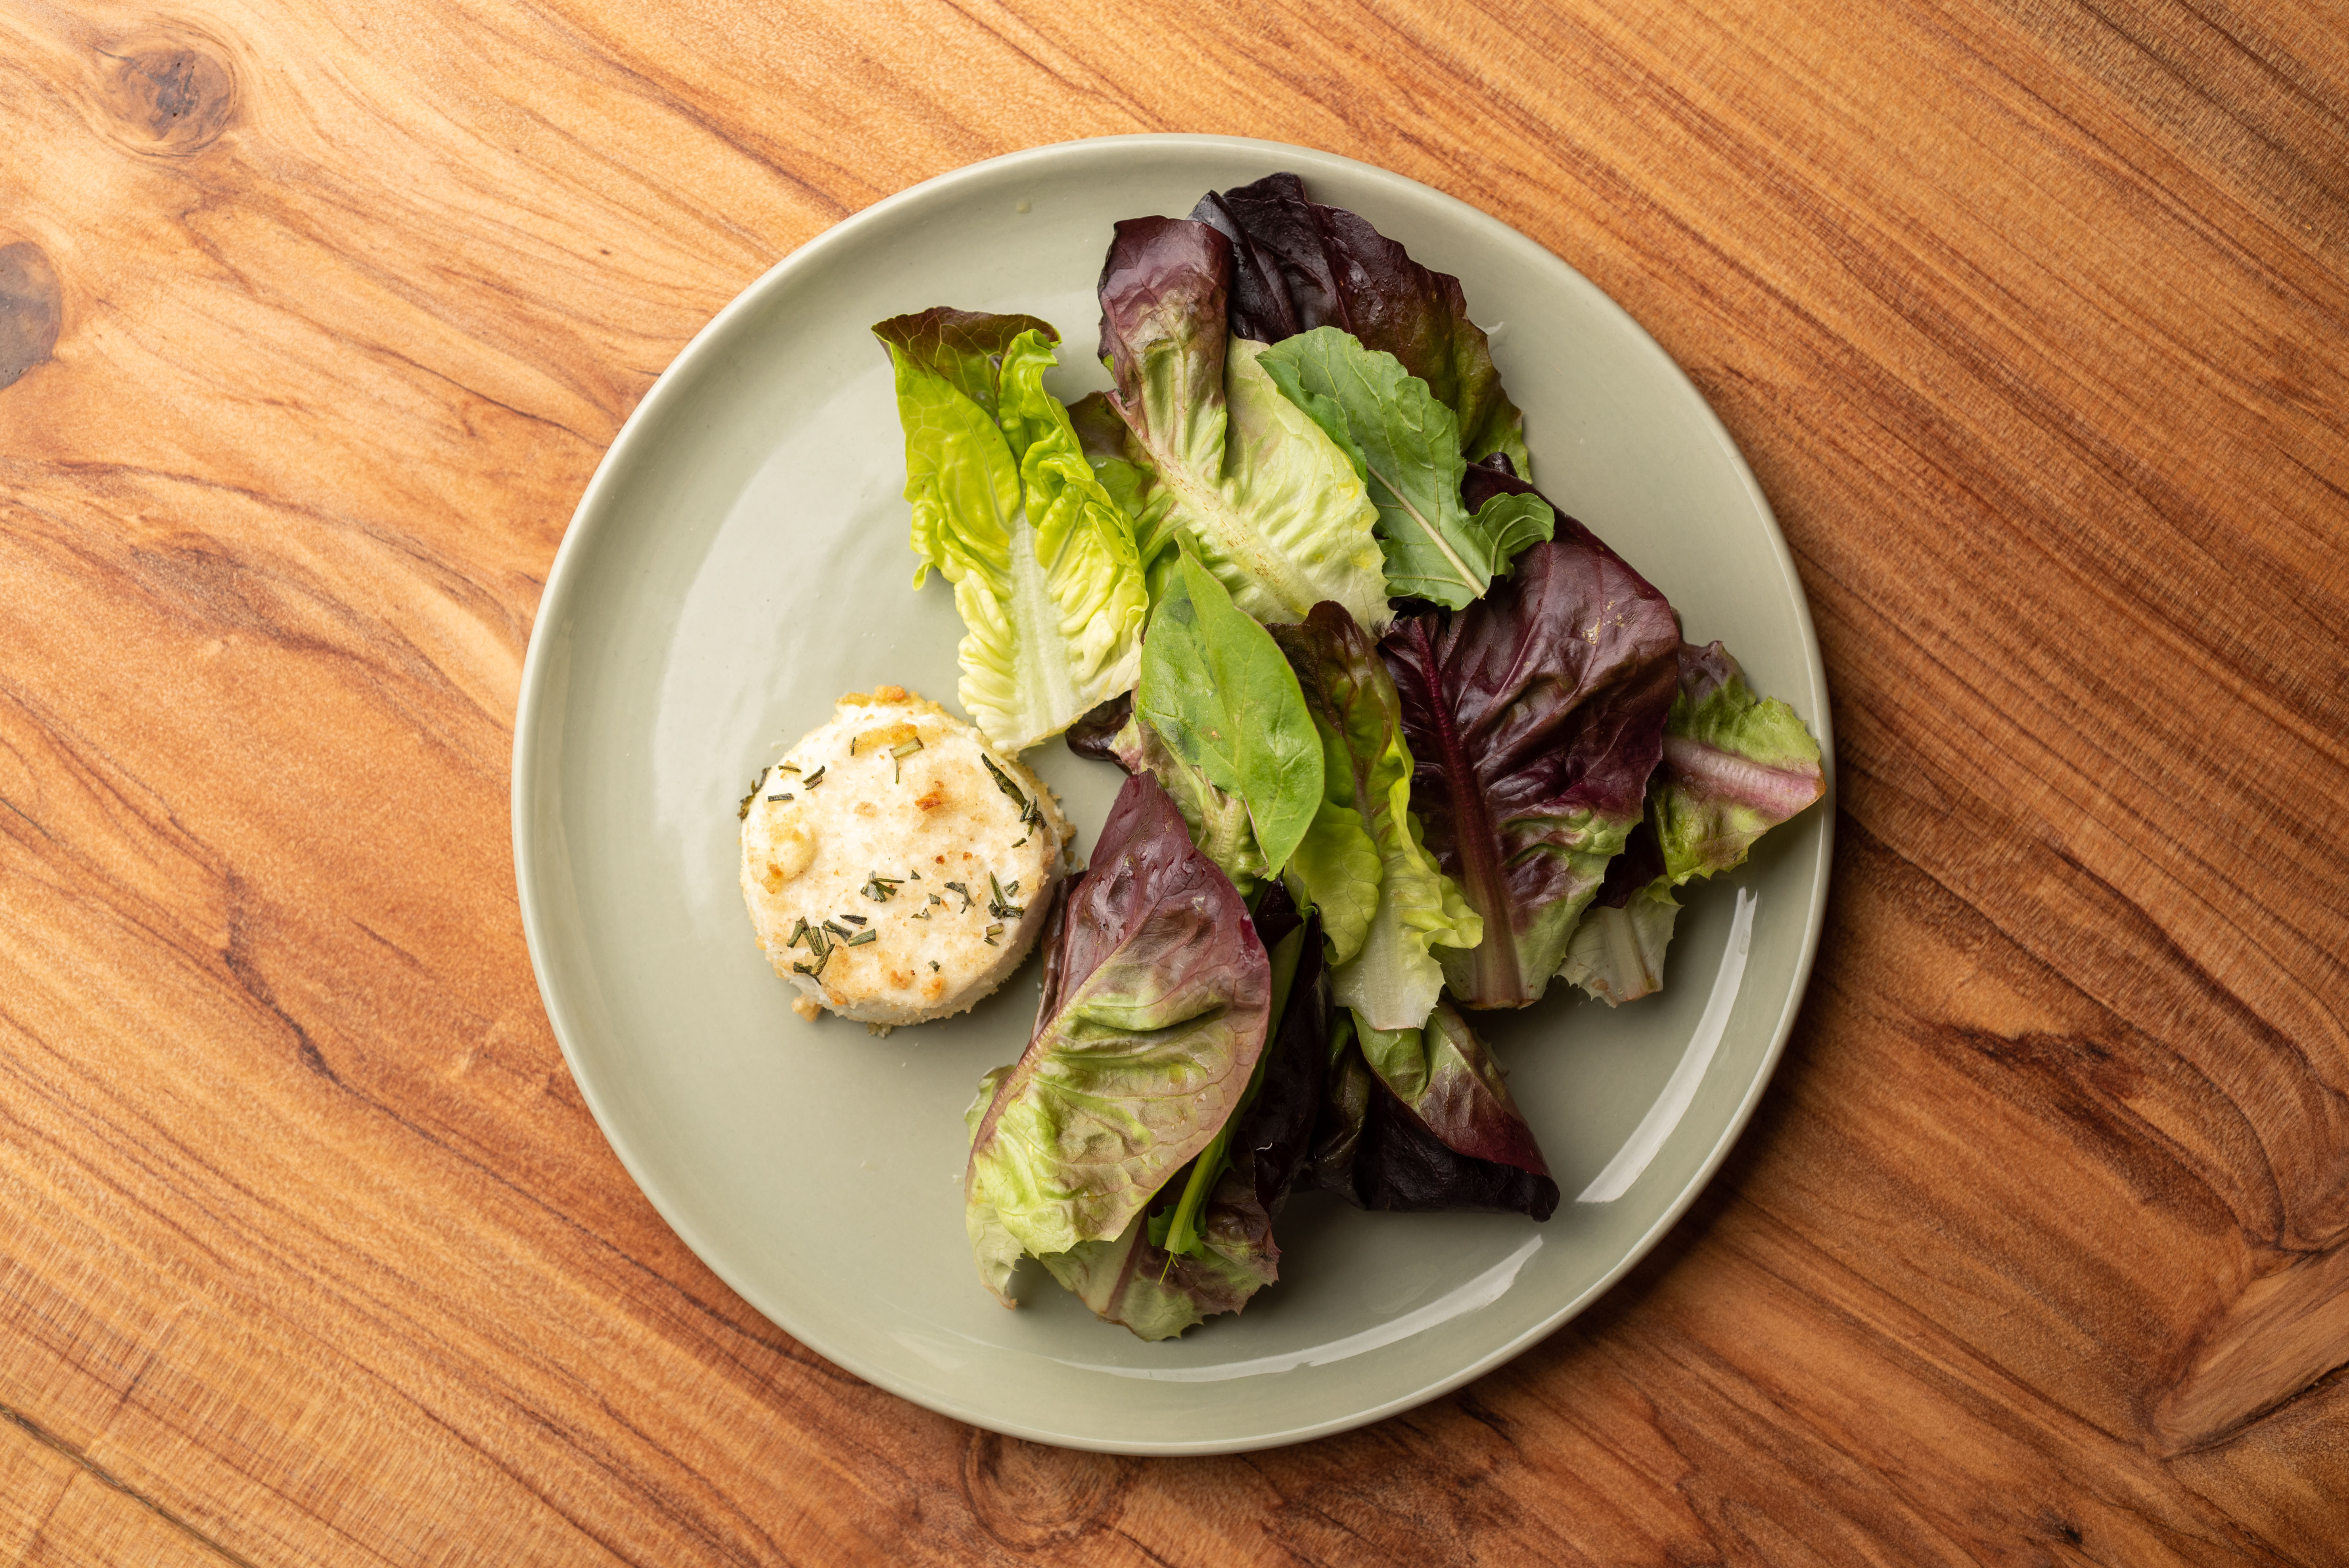 An overhead shot of a simple plate of lettuces and ring of baked goat cheese during daytime.